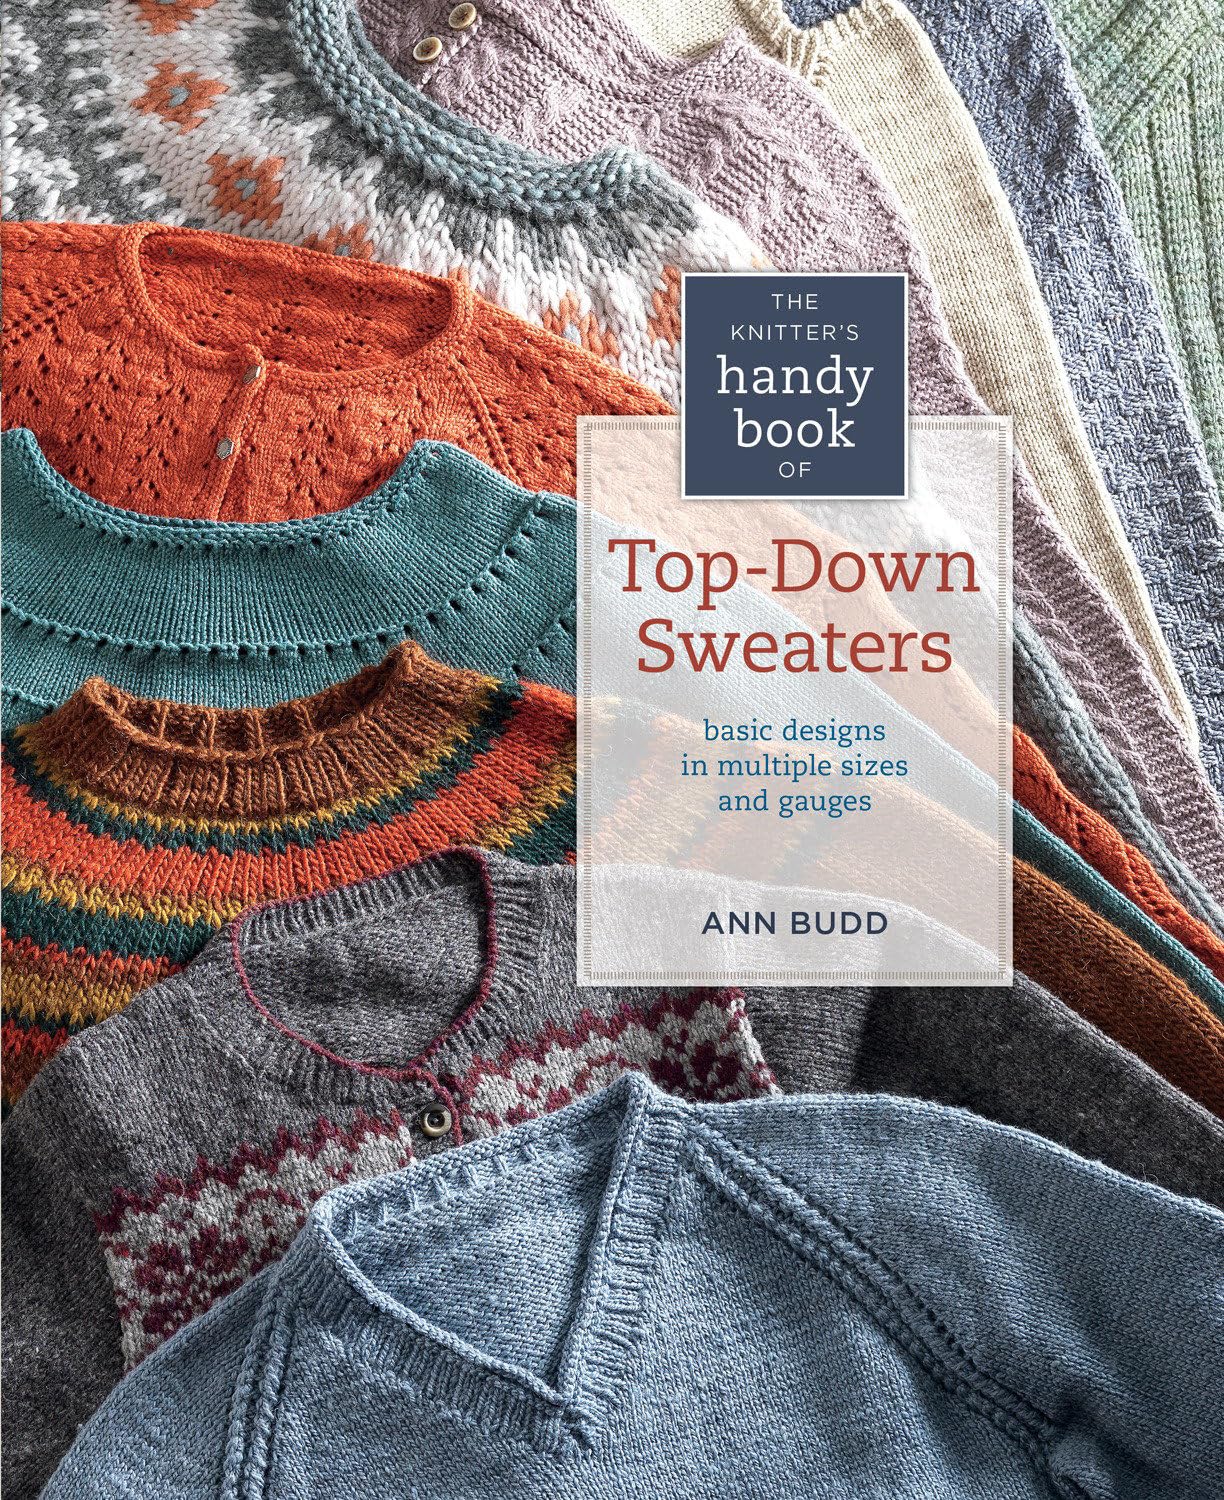 The Knitter's Handy Book of Top-Down Sweaters - Ann Budd